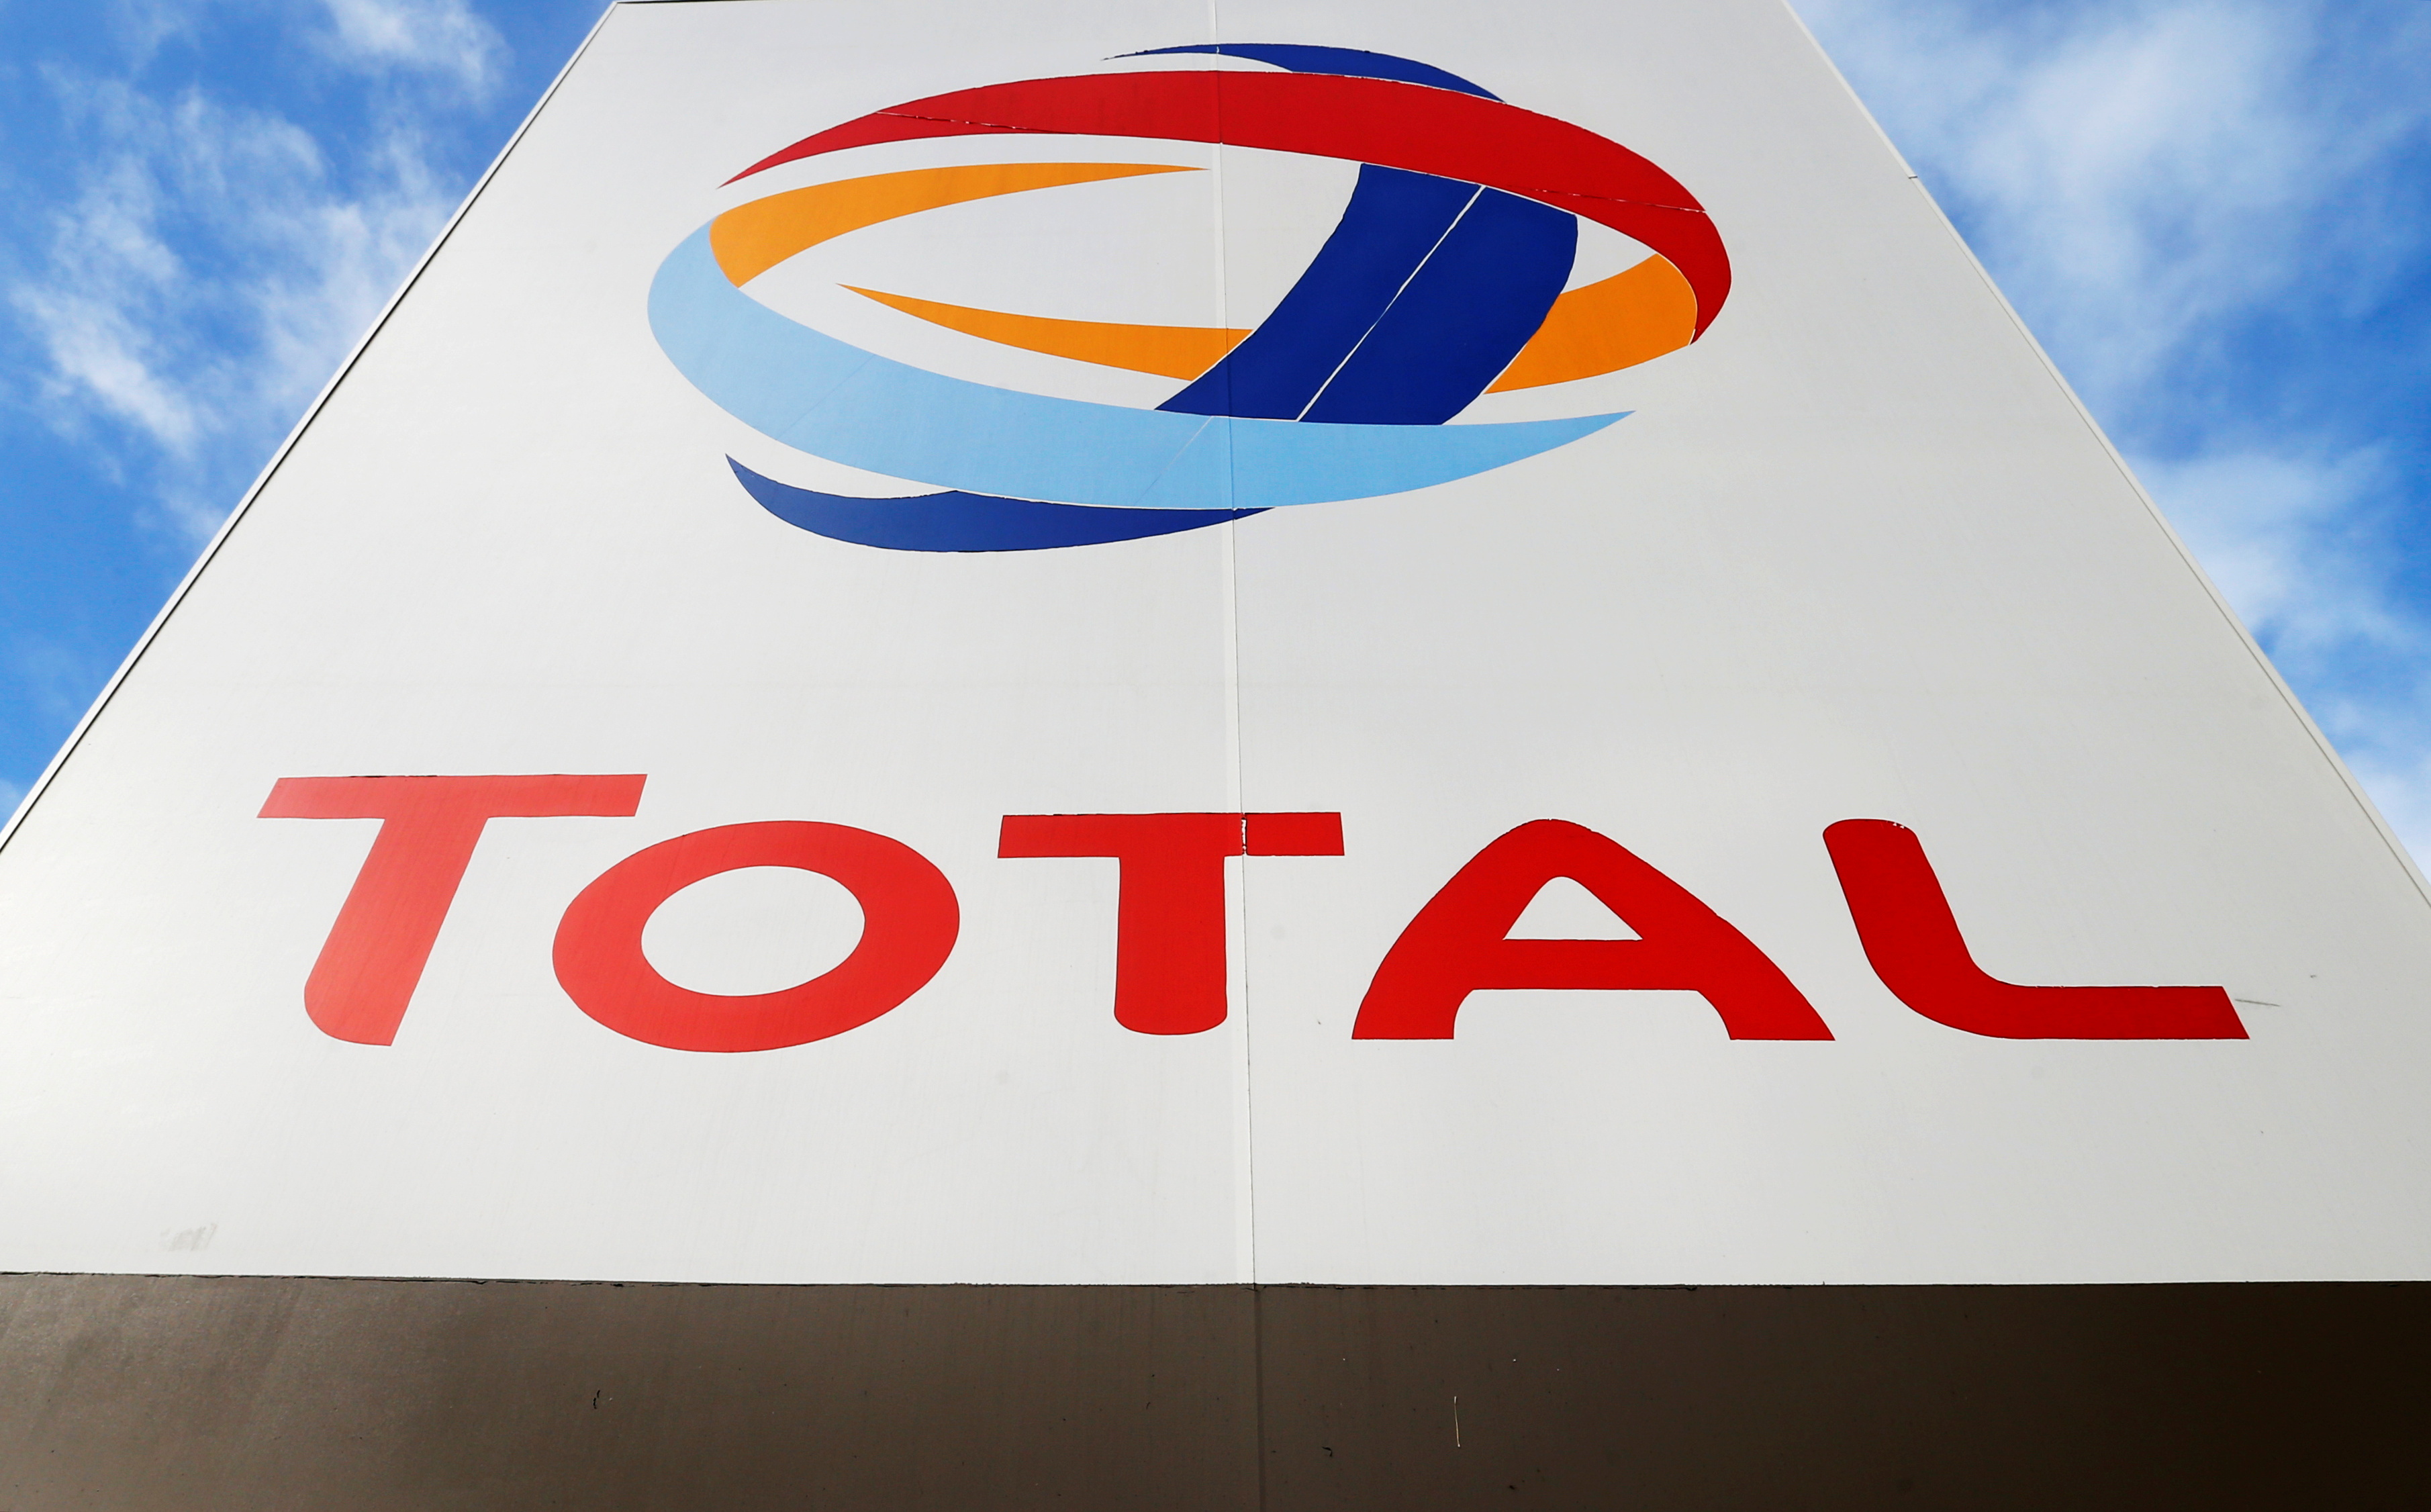 The logo of French oil giant Total is pictured at a petrol station in Bordeaux